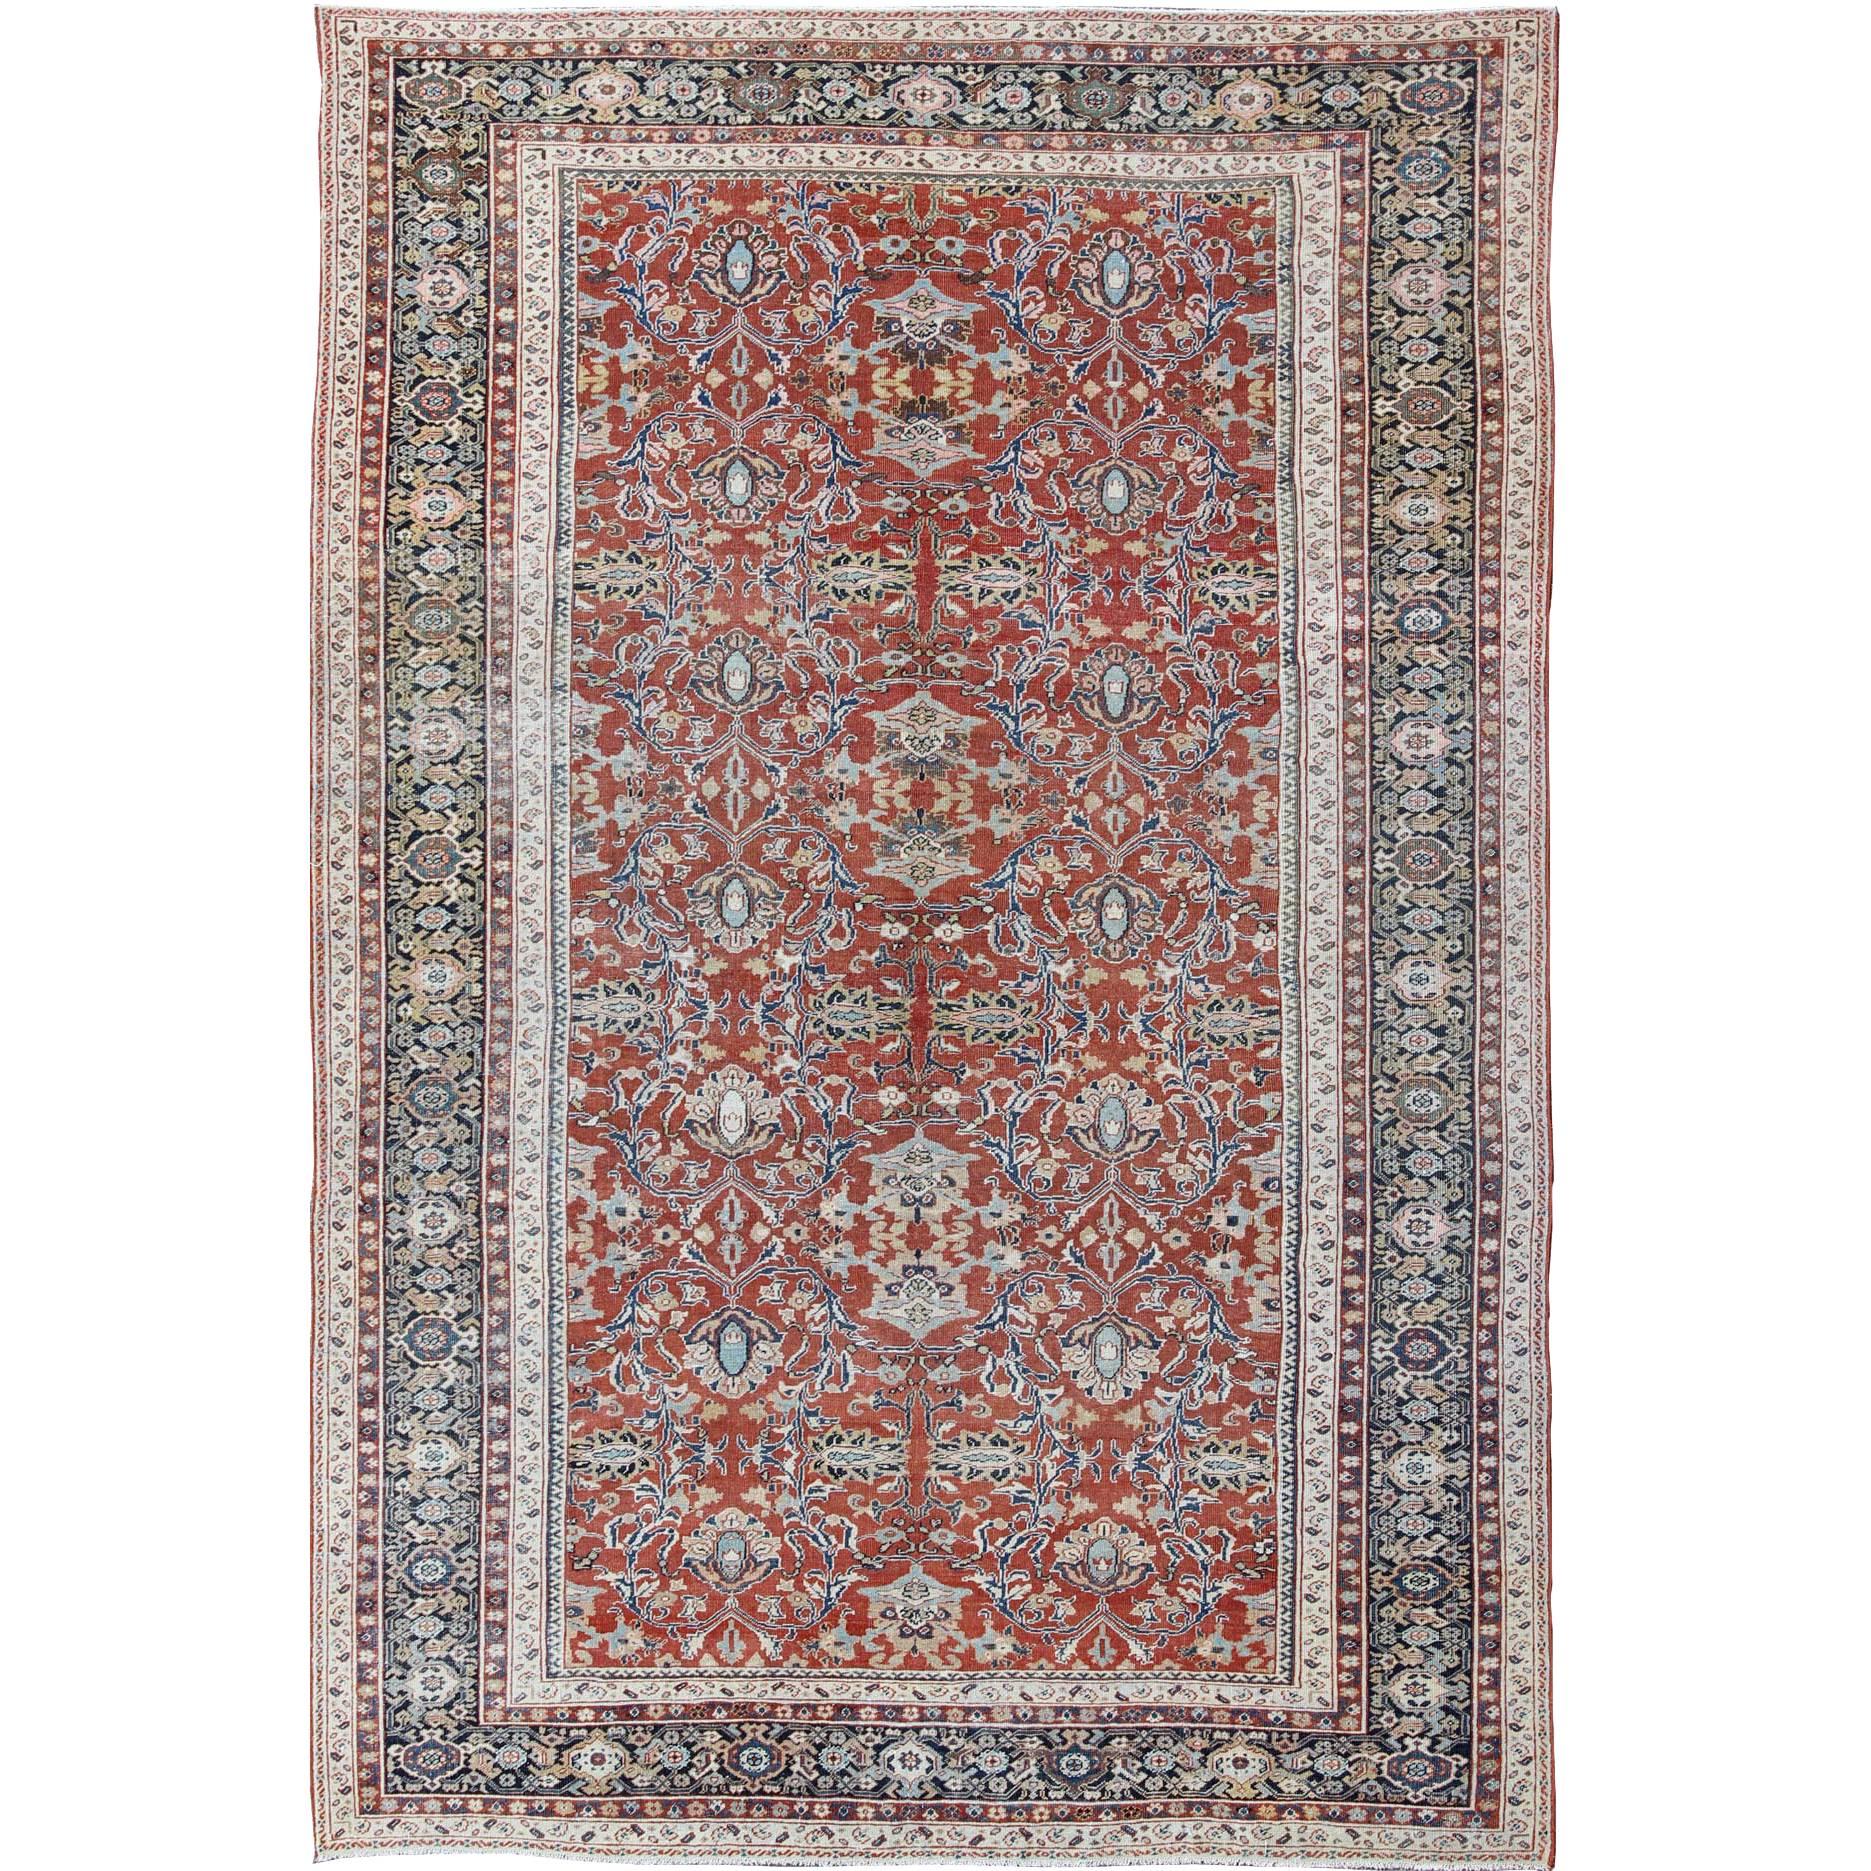 Antique Sultanabad Rug with Large Flower Design in Soft Red Field & Multi Colors